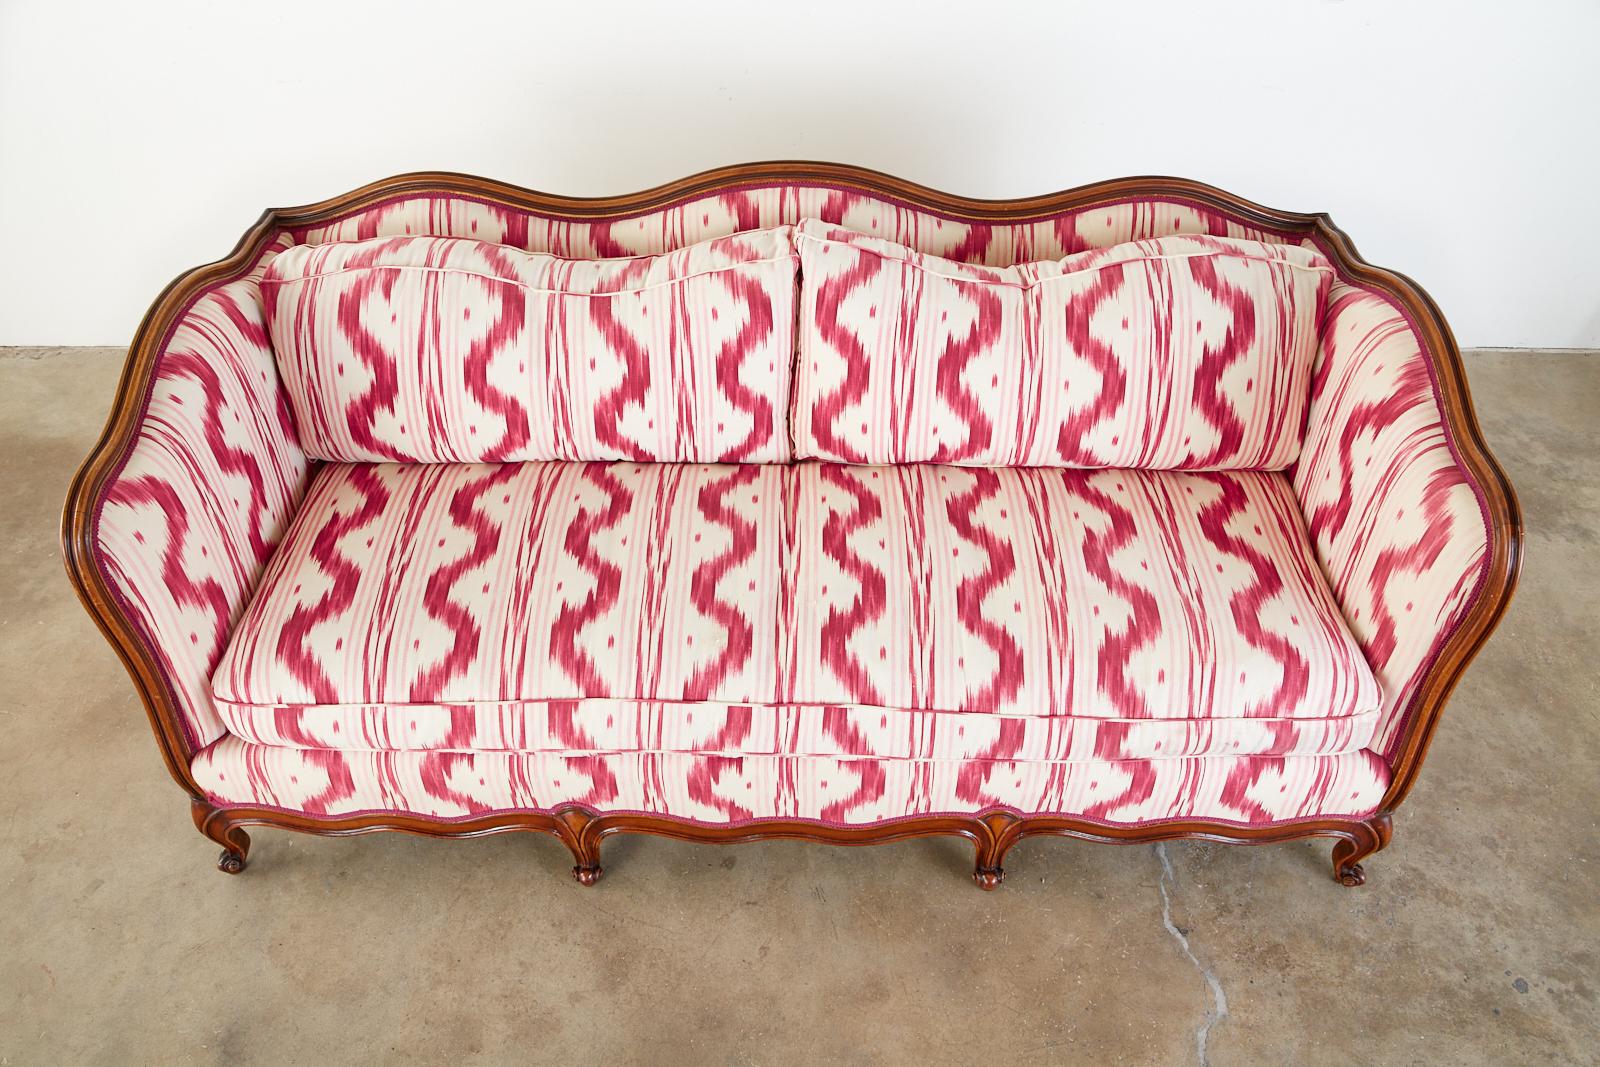 French Provincial Serpentine Canape Settee Pierre Frey Toile Ikat 4